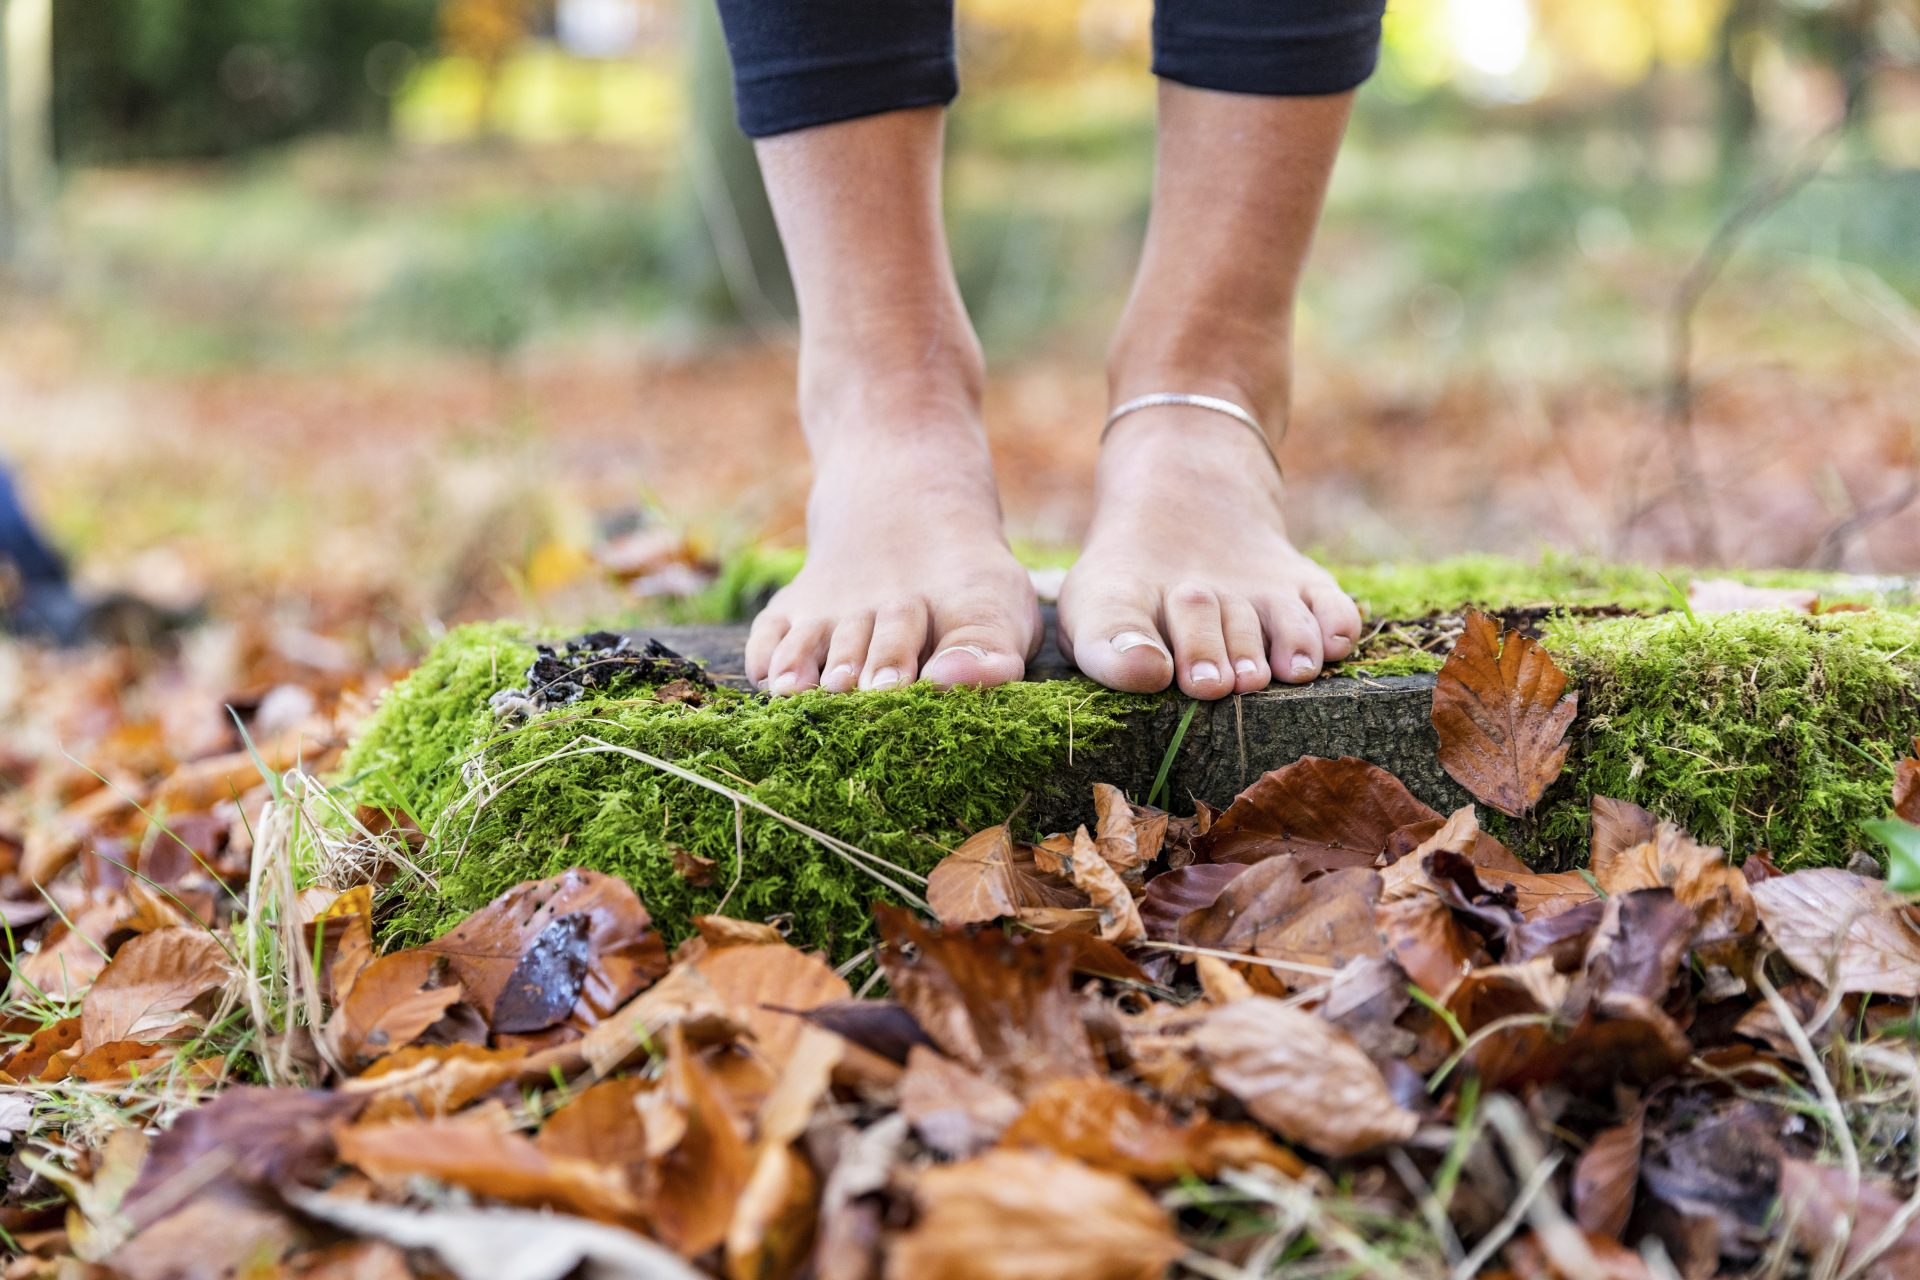 Grounding: Can walking barefoot boost your health and mood?